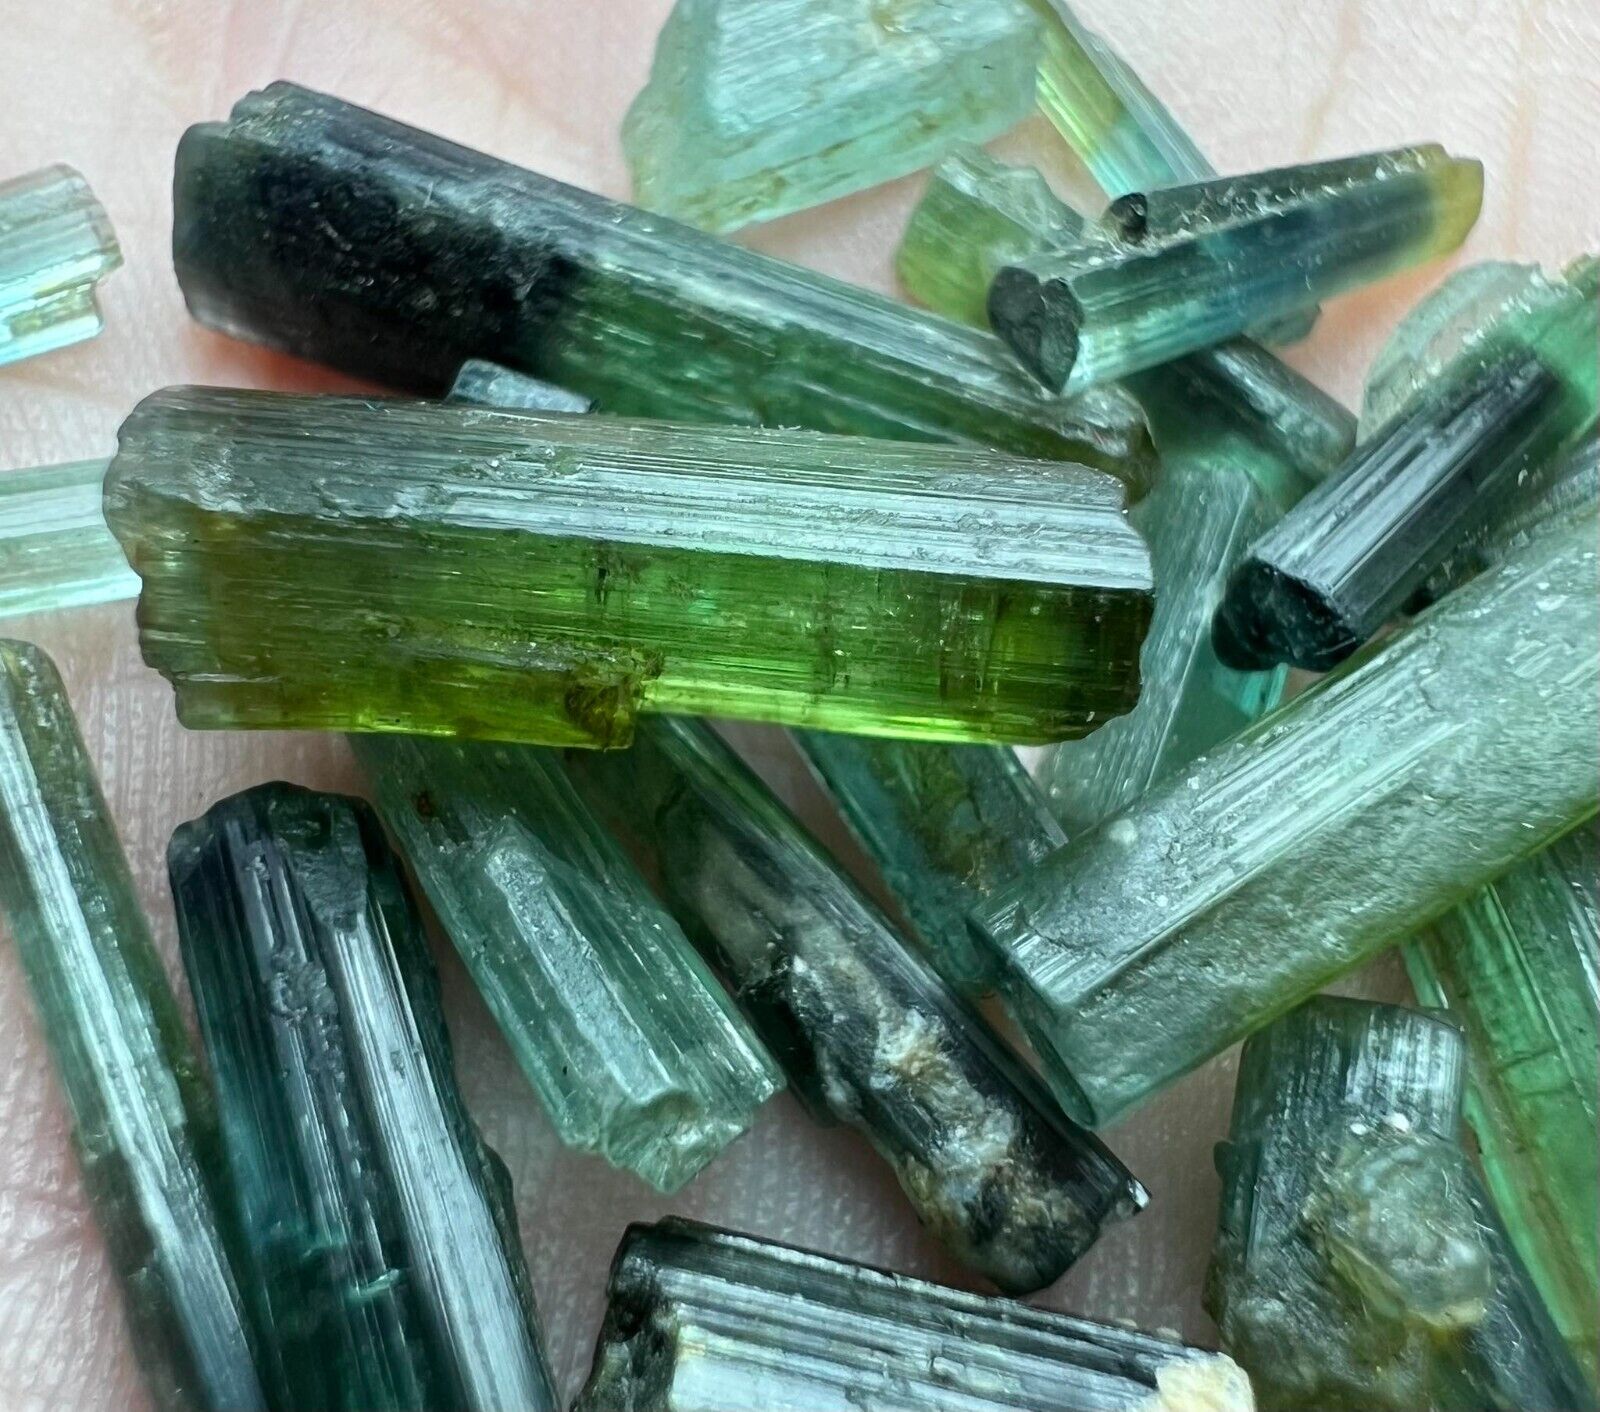 37 CT Full/Well Terminated Multi Color Tourmaline Crystals Lot From Afghanistan